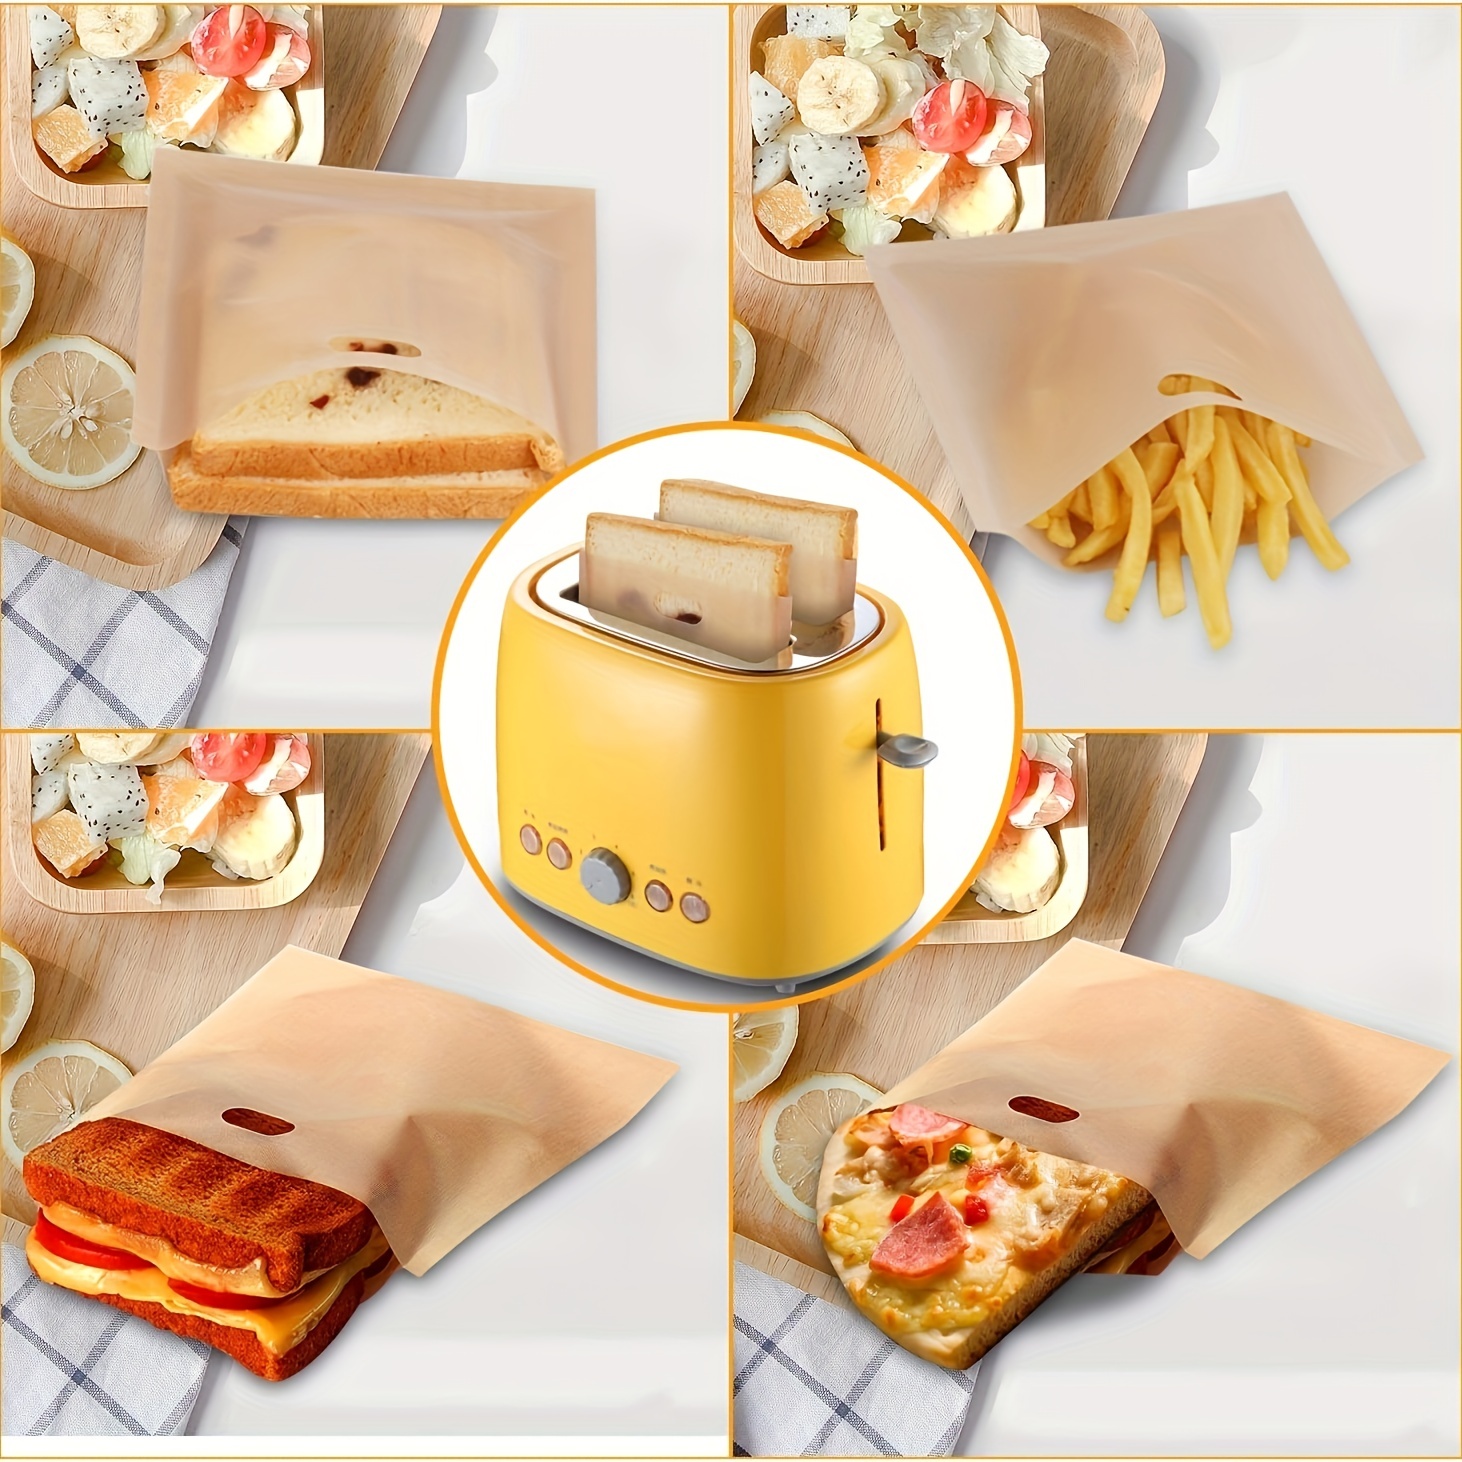 5Pcs/Set Reusable Toaster Bags Non-Stick Toasted Sandwich Bags